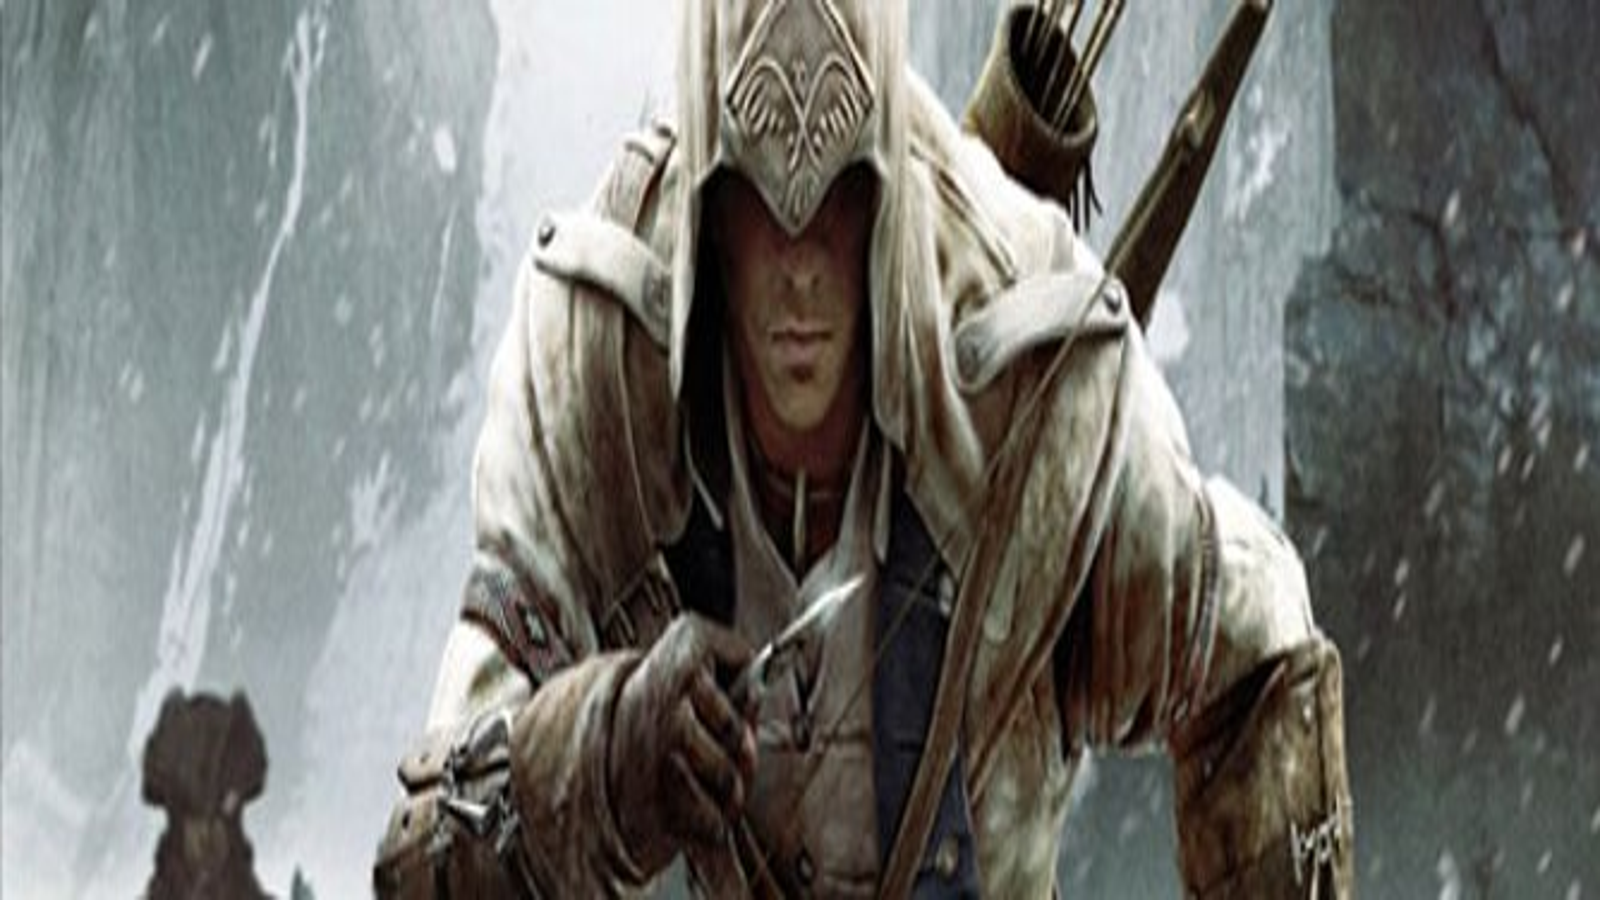 Assassins Creed 3: Education and videogames – The Albion College